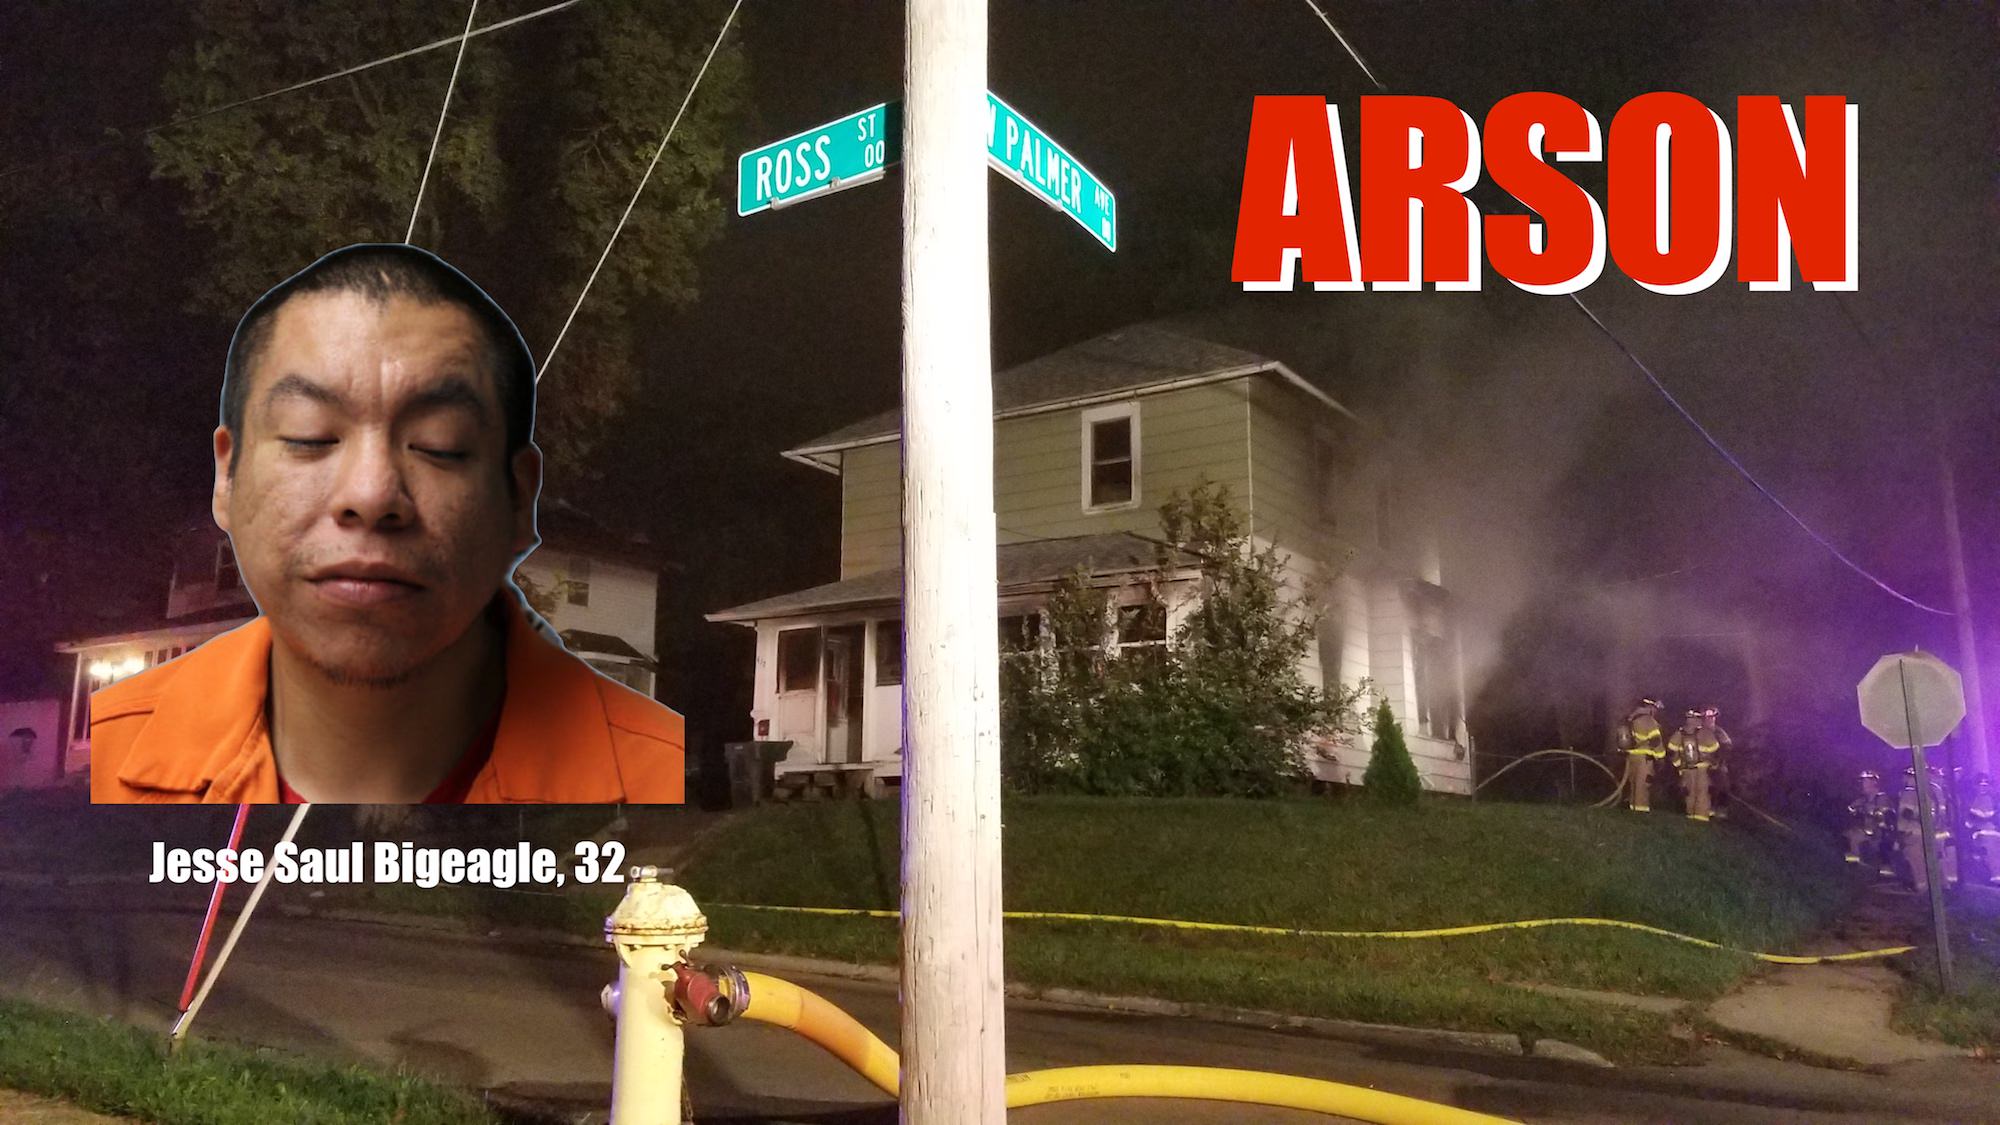 Man charged with arson after fire on Ross Street in Sioux City